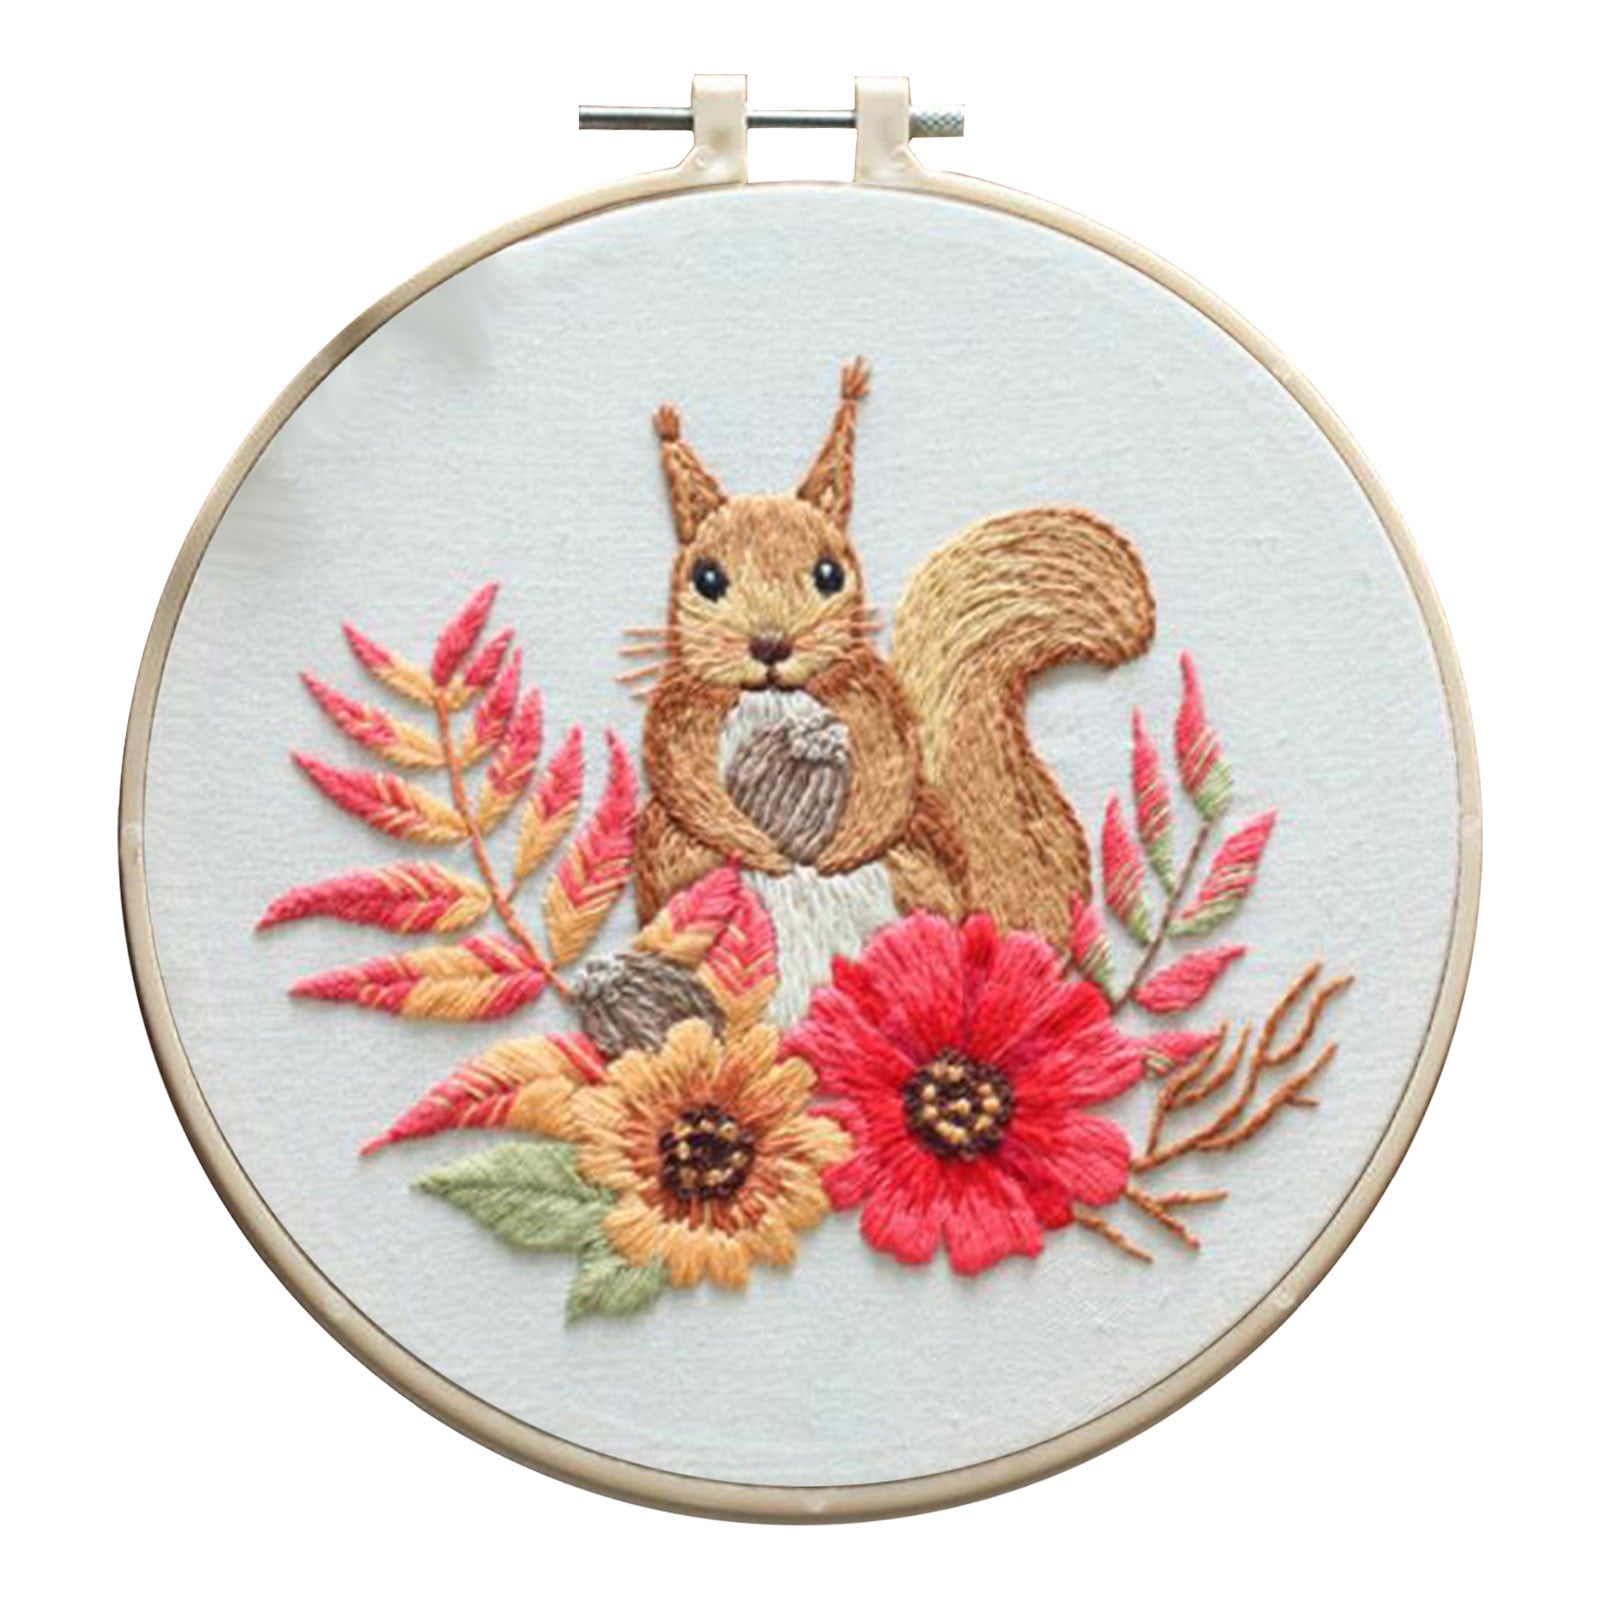 Your Cross Stitch & Embroidery 1 - On sale NOW!